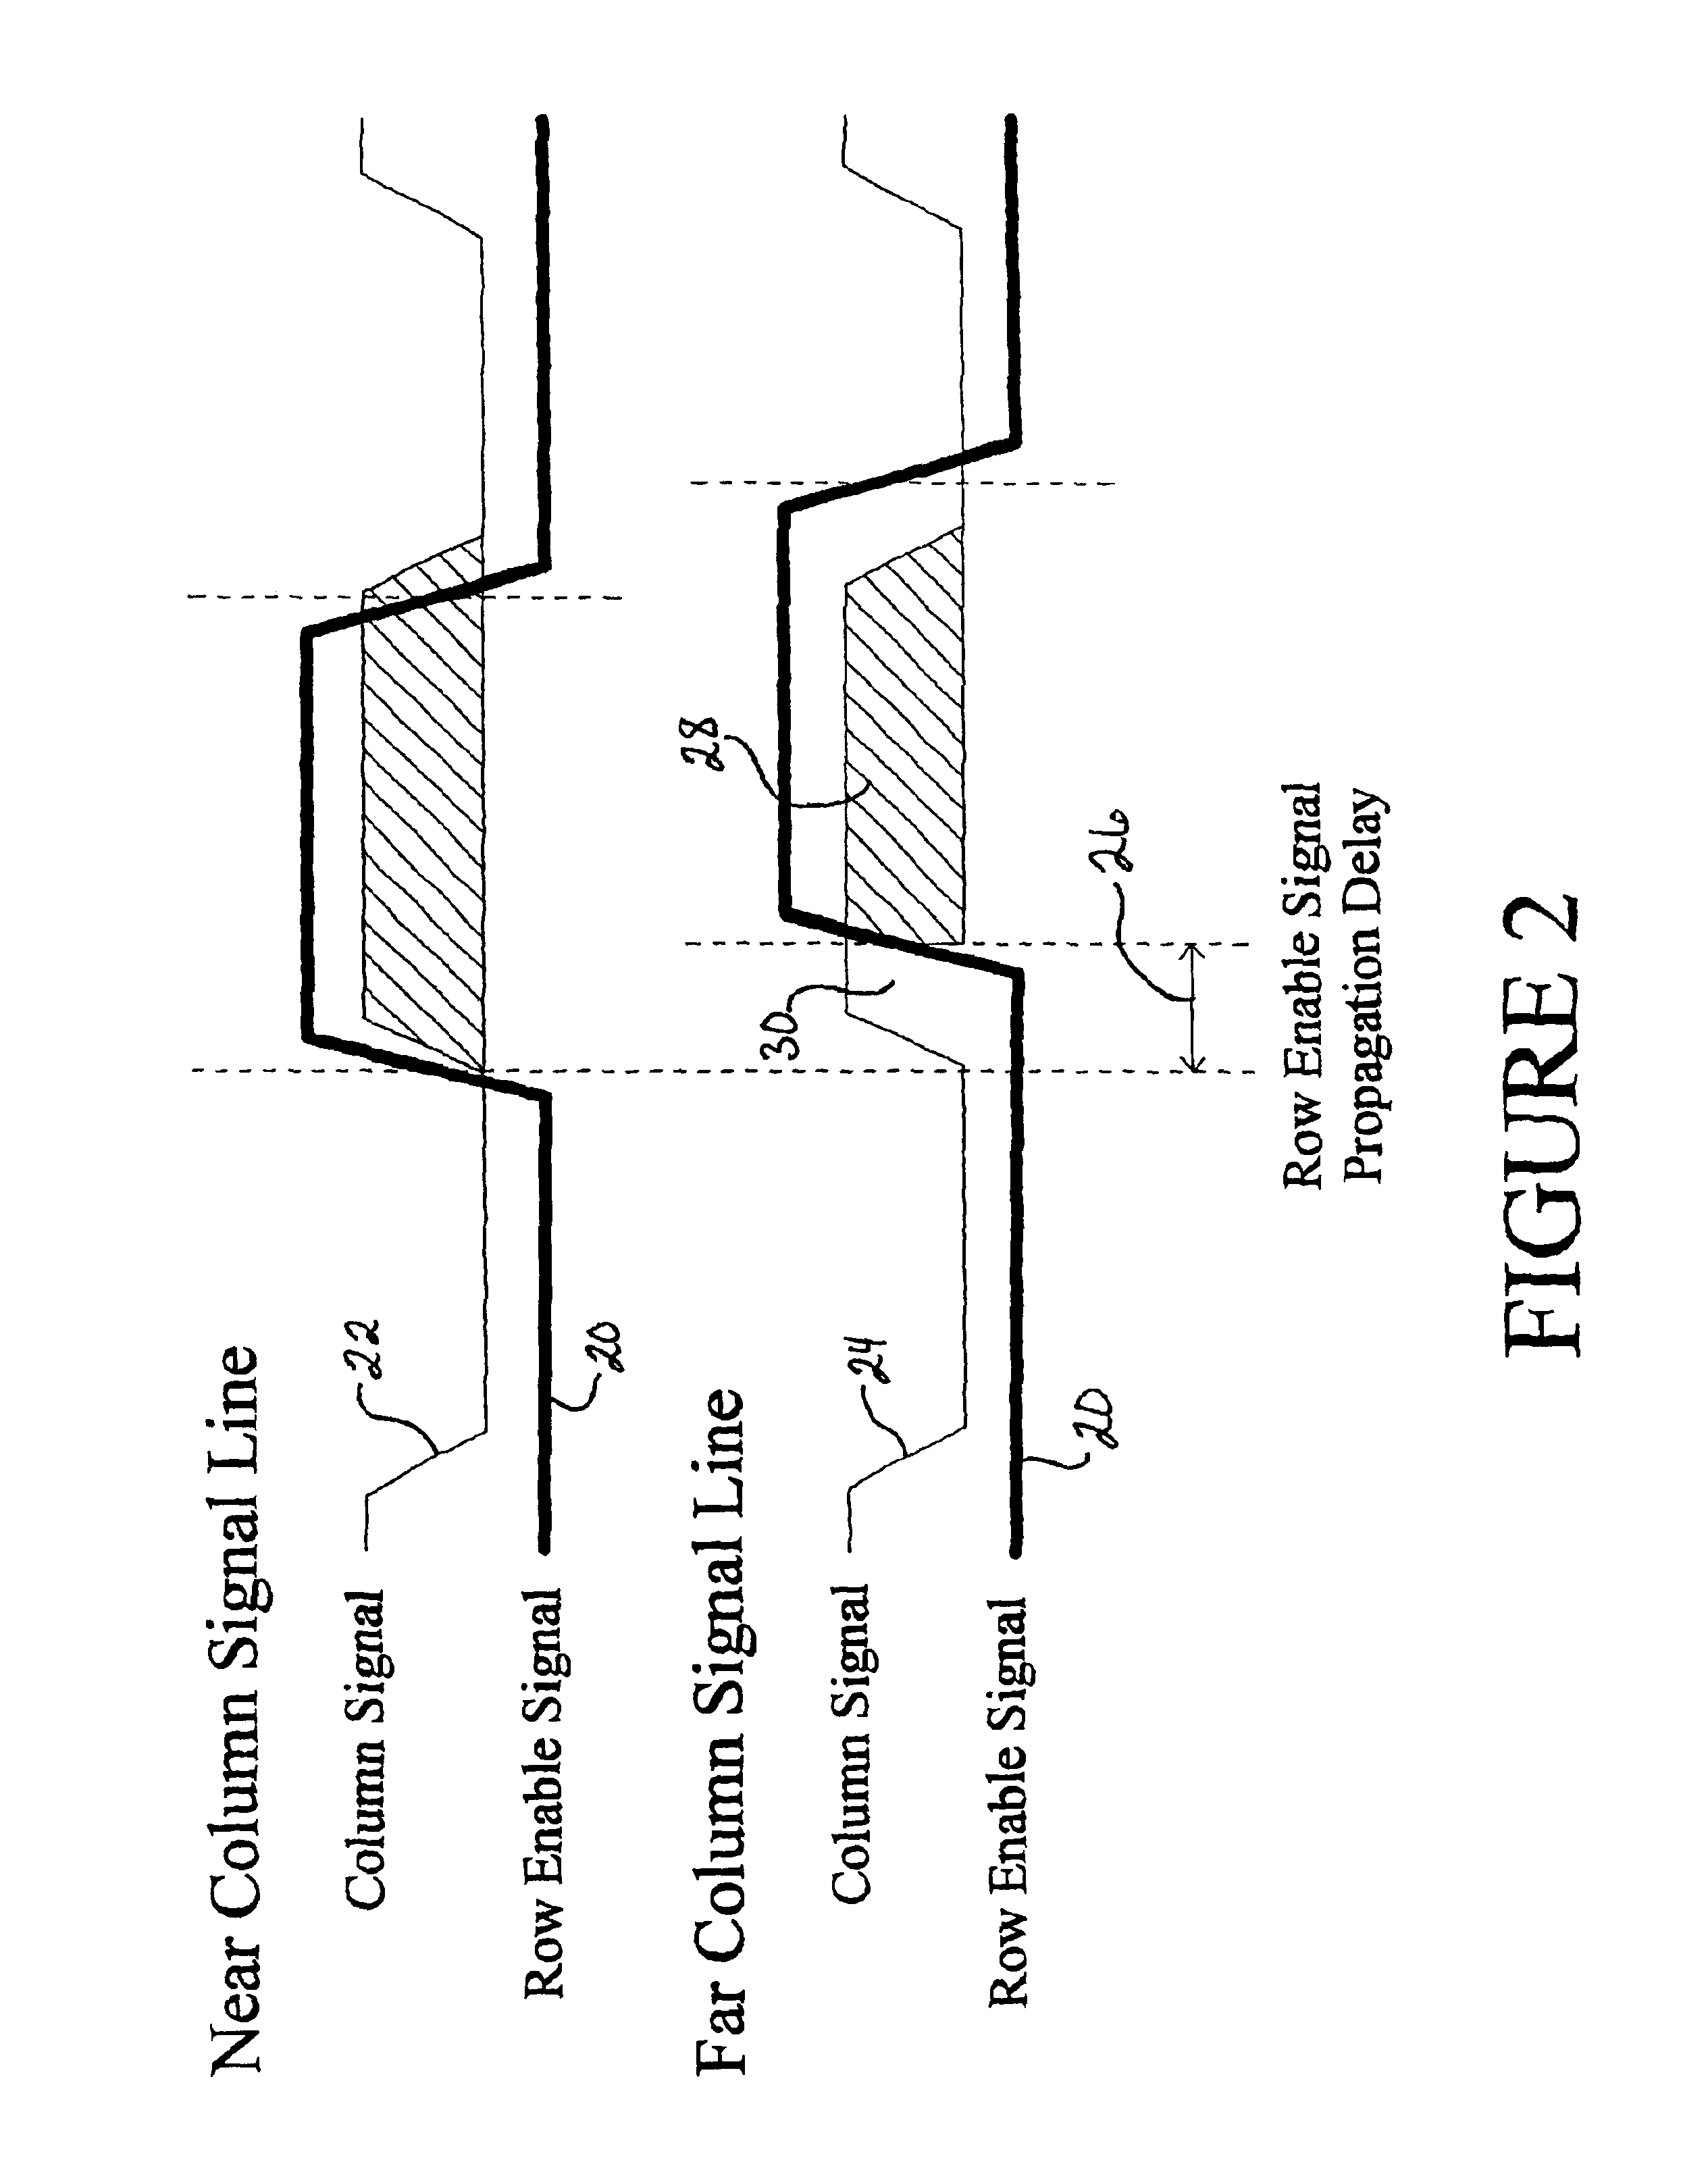 Display line drivers and method for signal propagation delay compensation